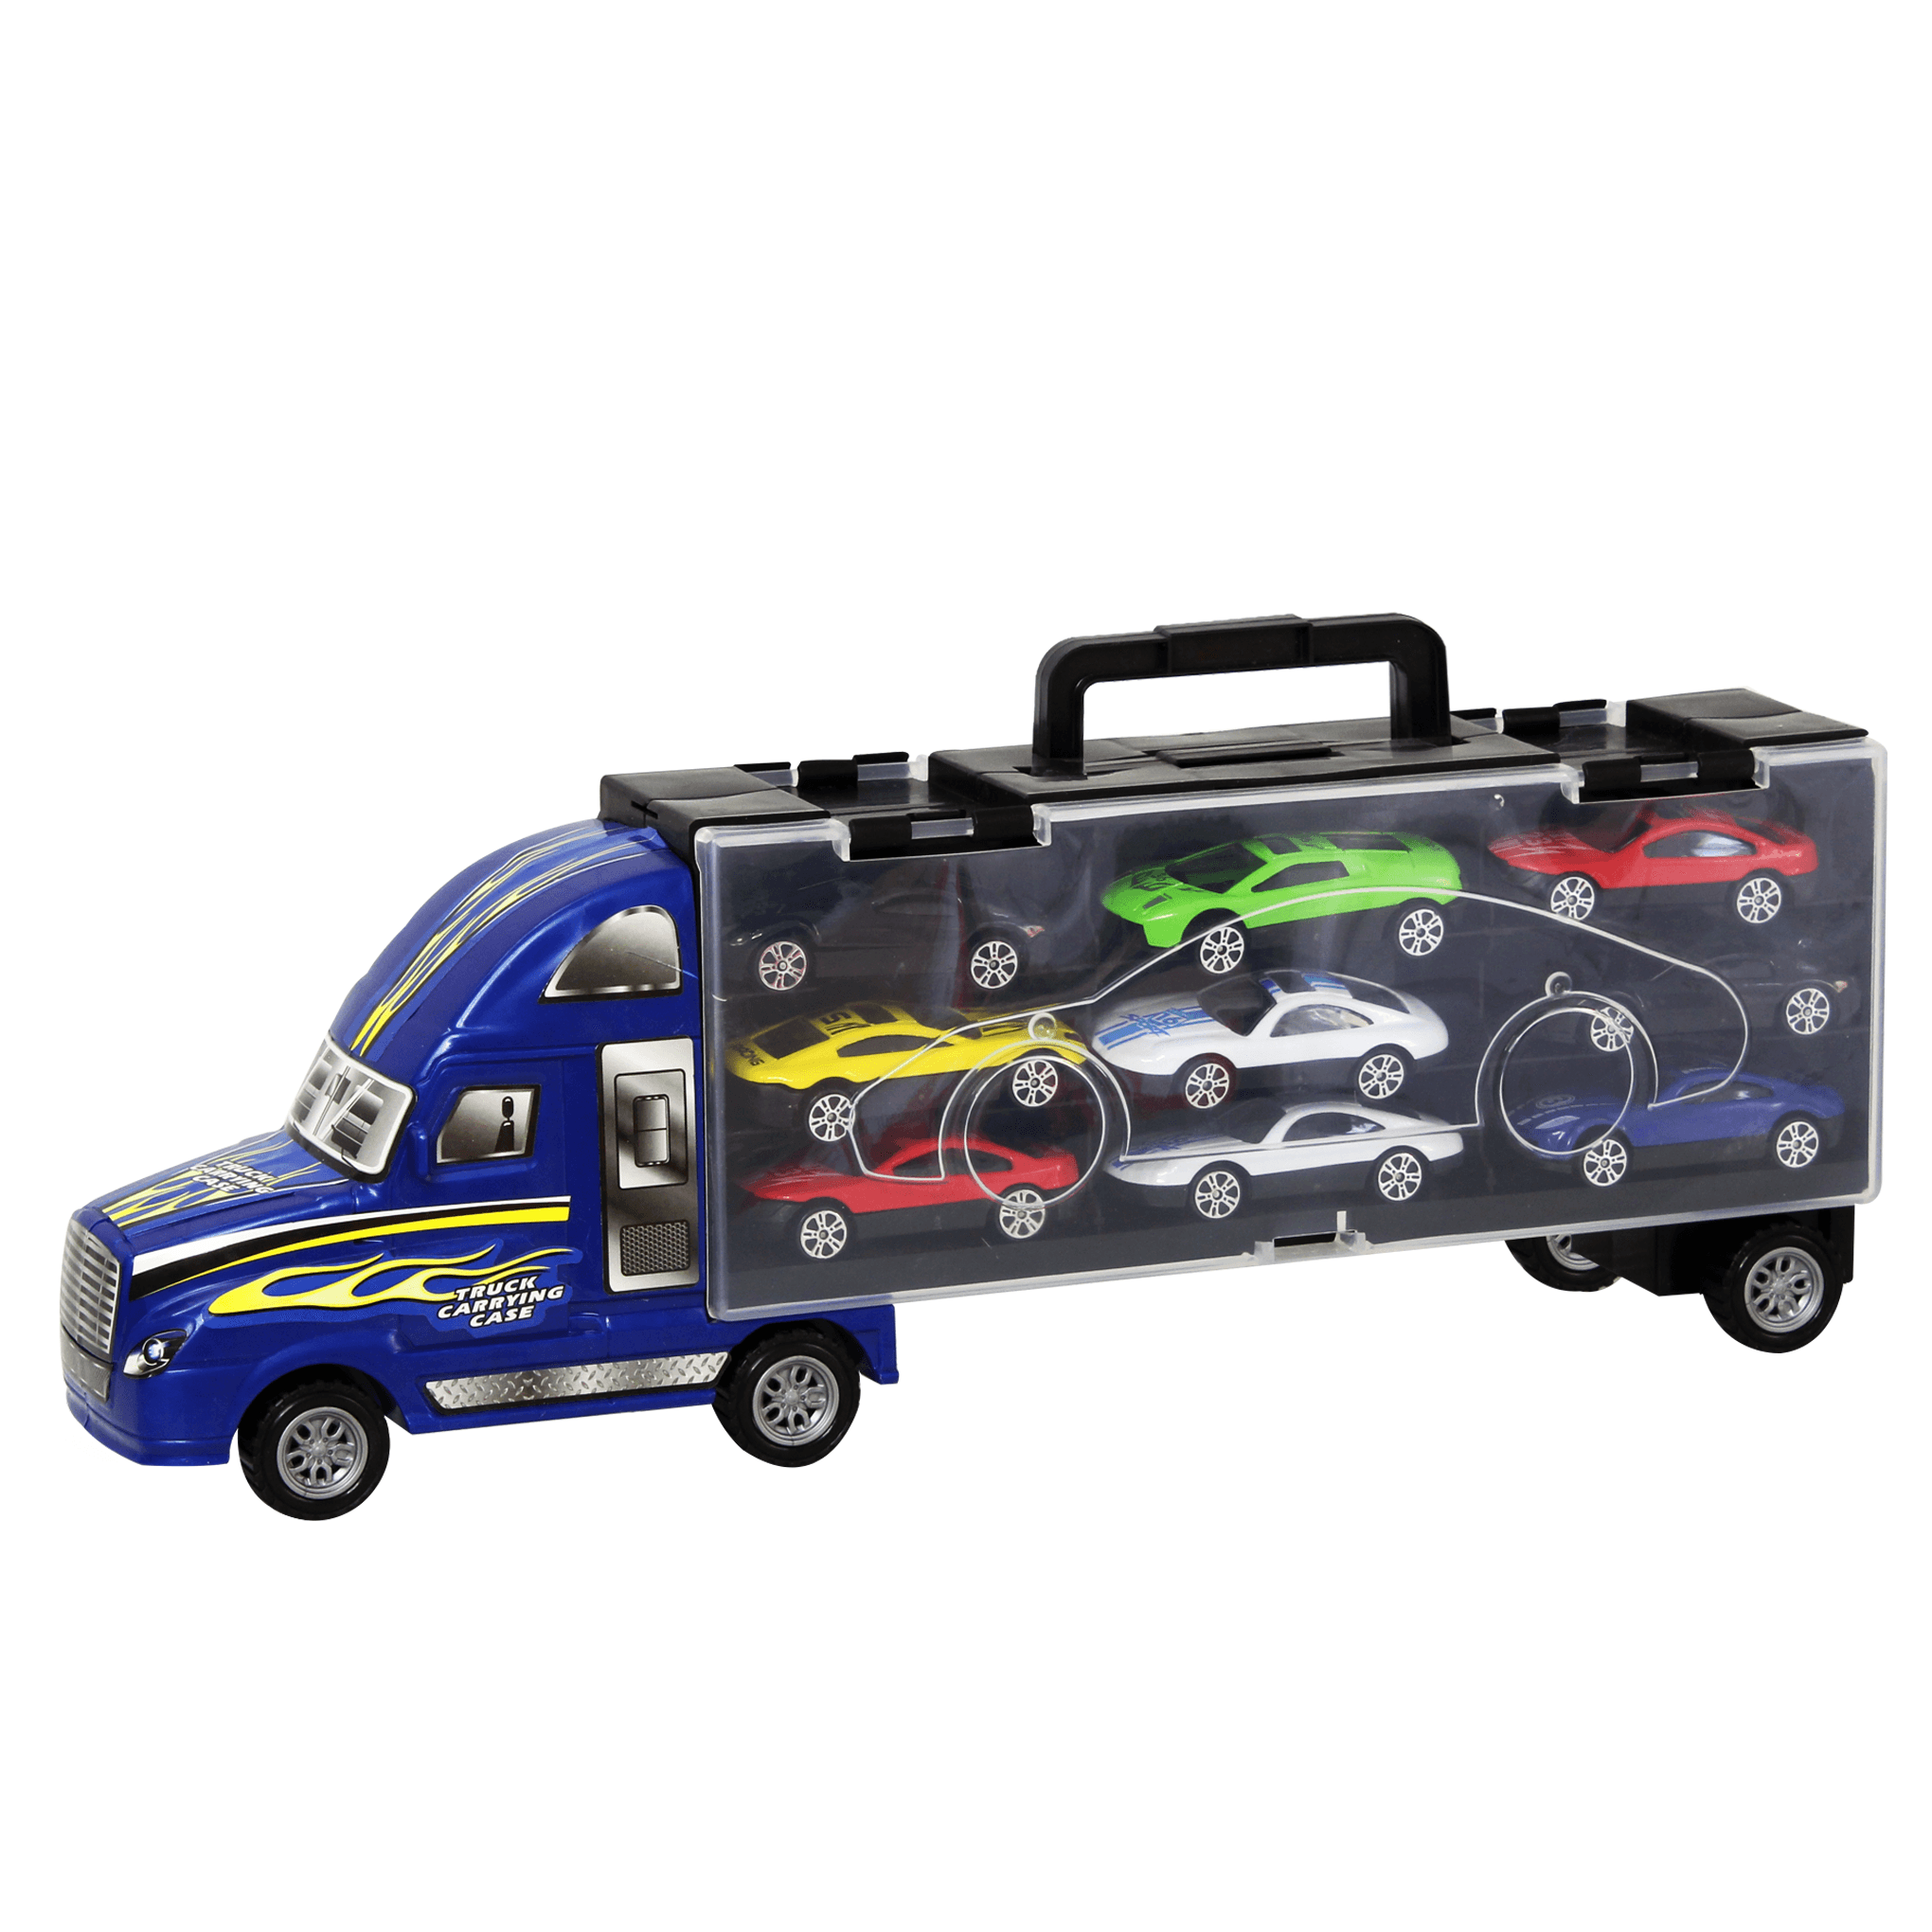 Die Cast Plastic Car Carrier Truck Toy And 9 Mini Cars Play Set - Blue